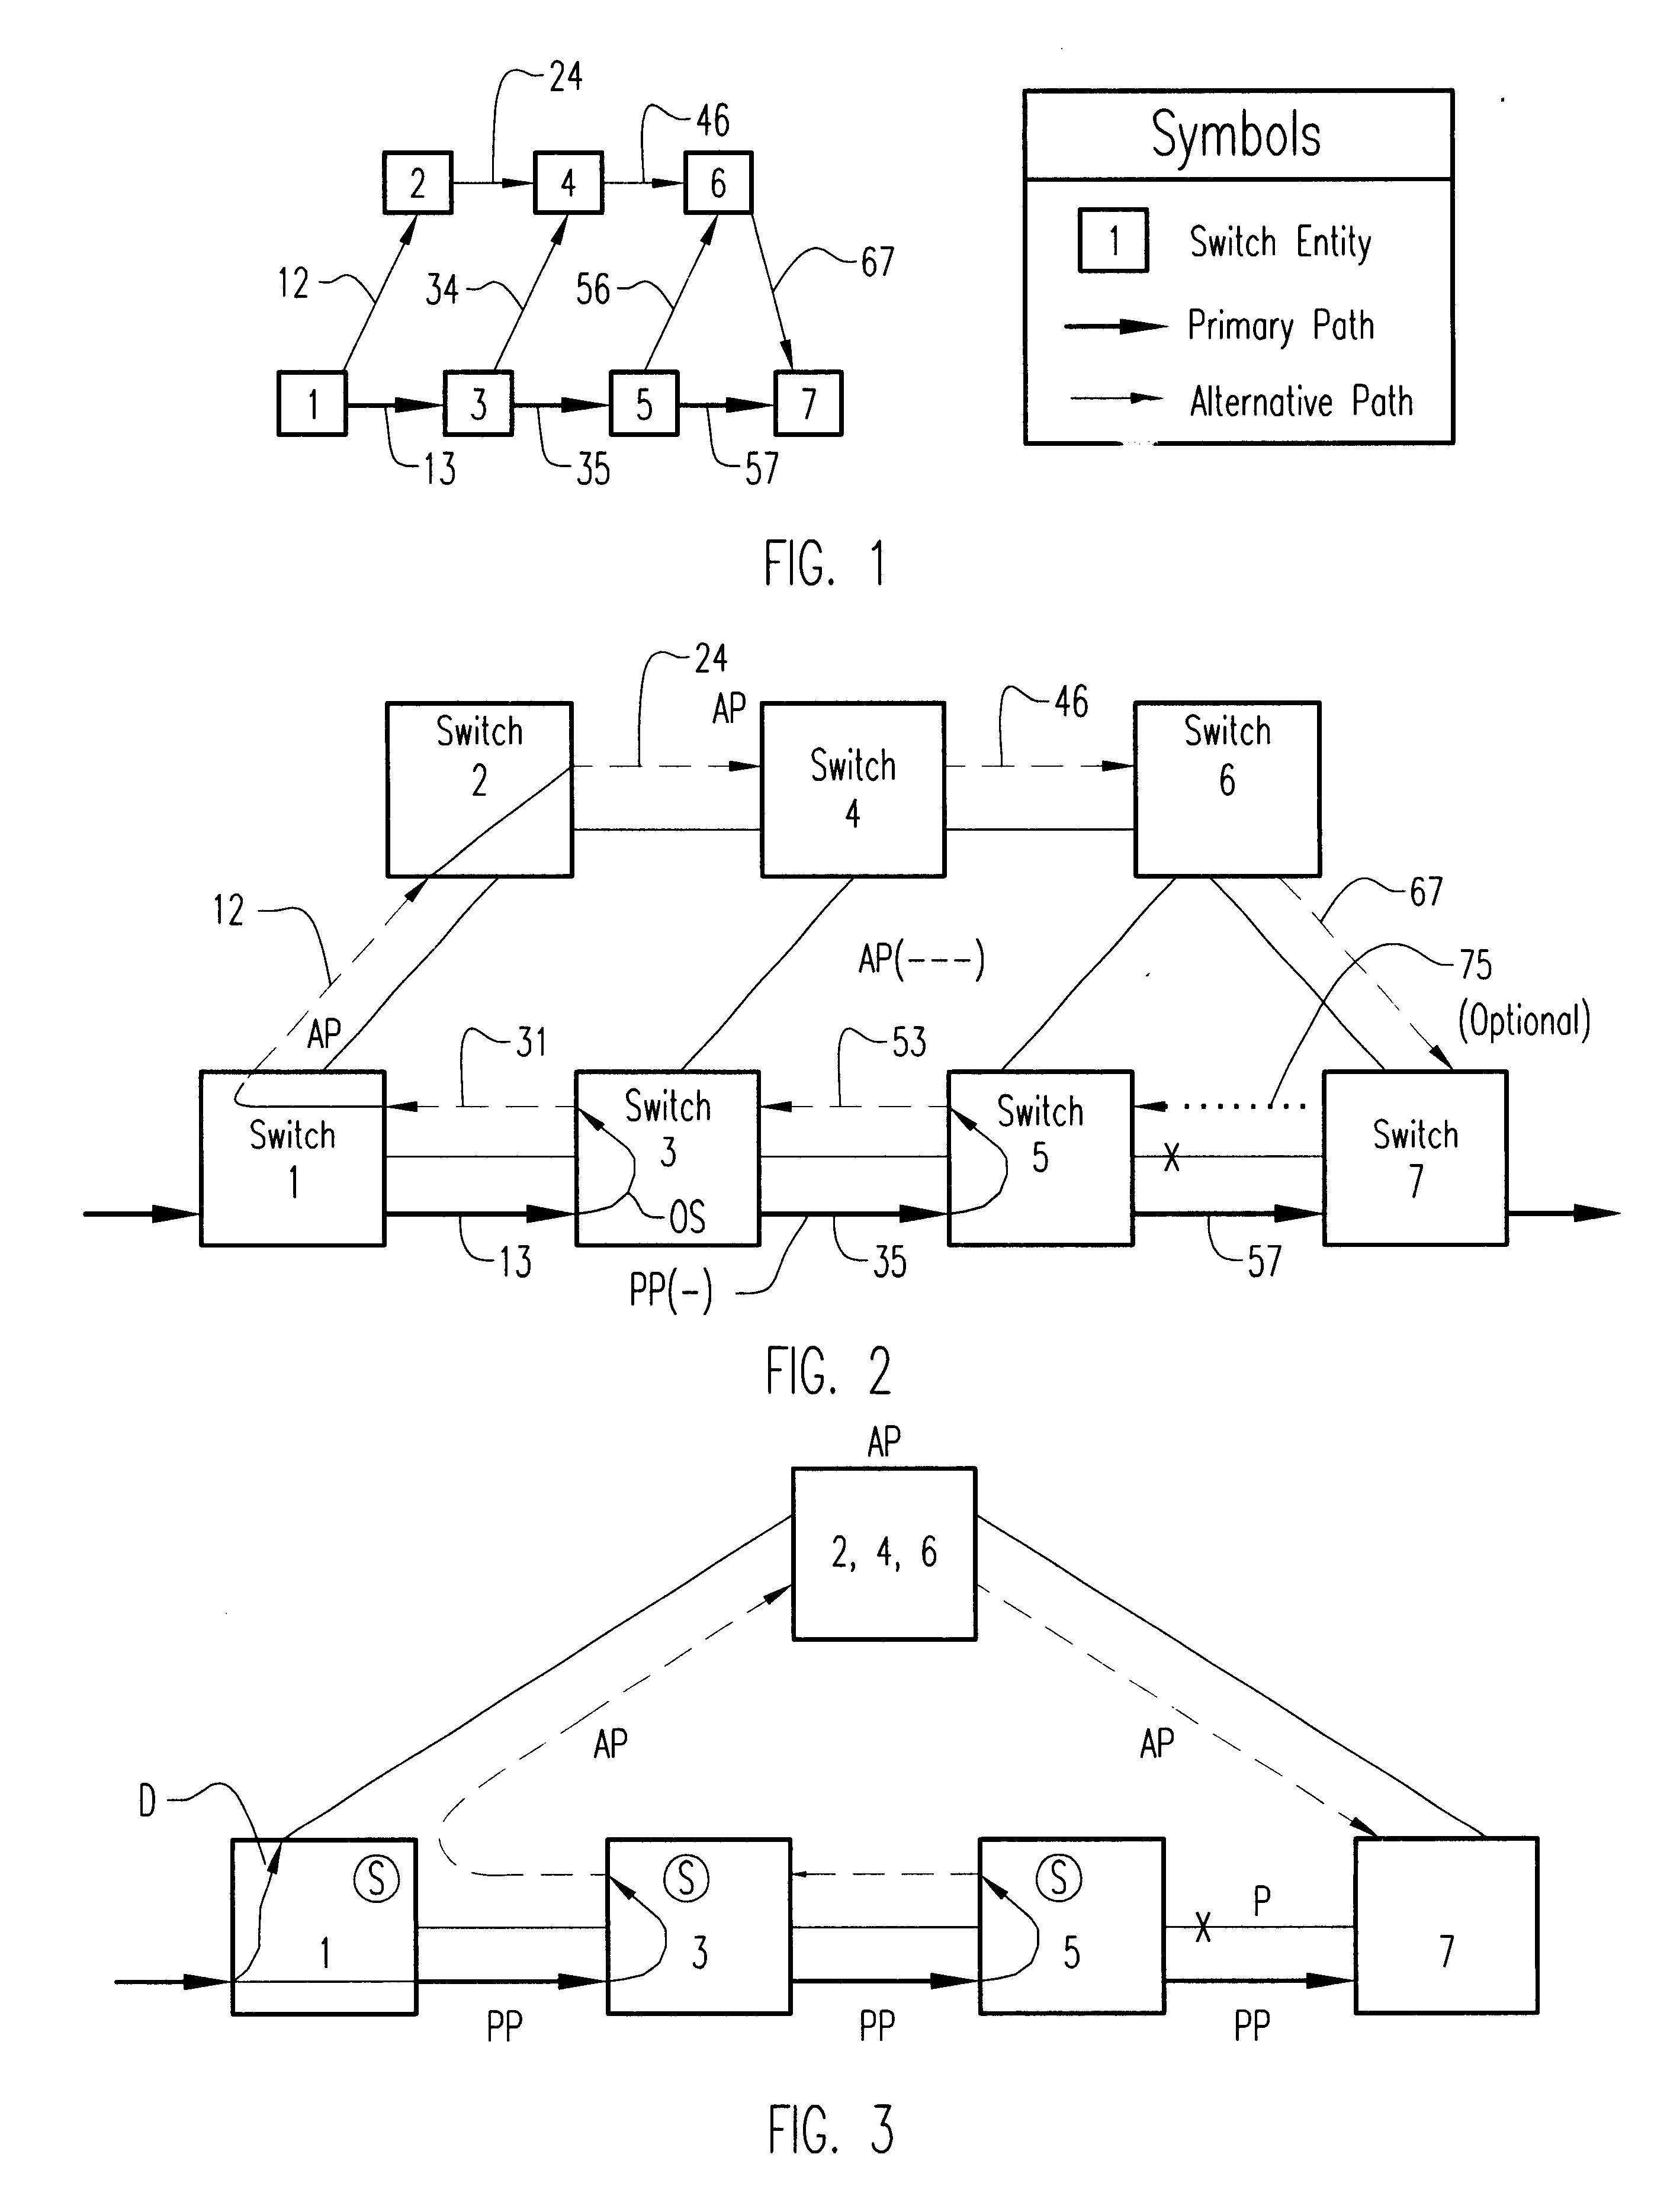 Method of and apparatus for fast alternate-path rerouting of labeled data packets normally routed over a predetermined primary label switched path upon failure or congestion in the primary path